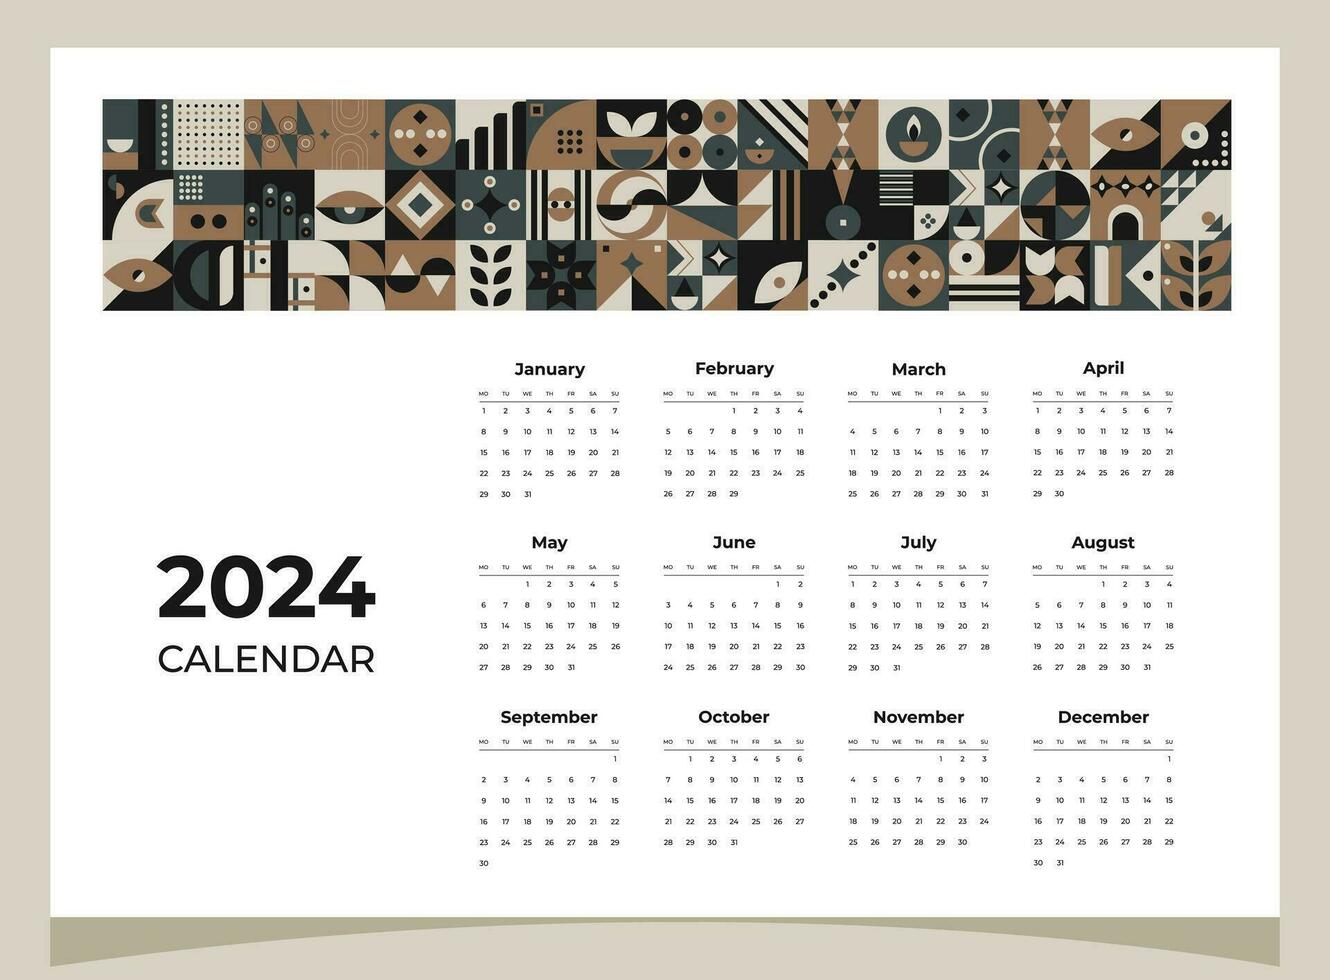 Calendar 2024 geometric patterns. Calendar template for 2024 year with geometric shapes. vector